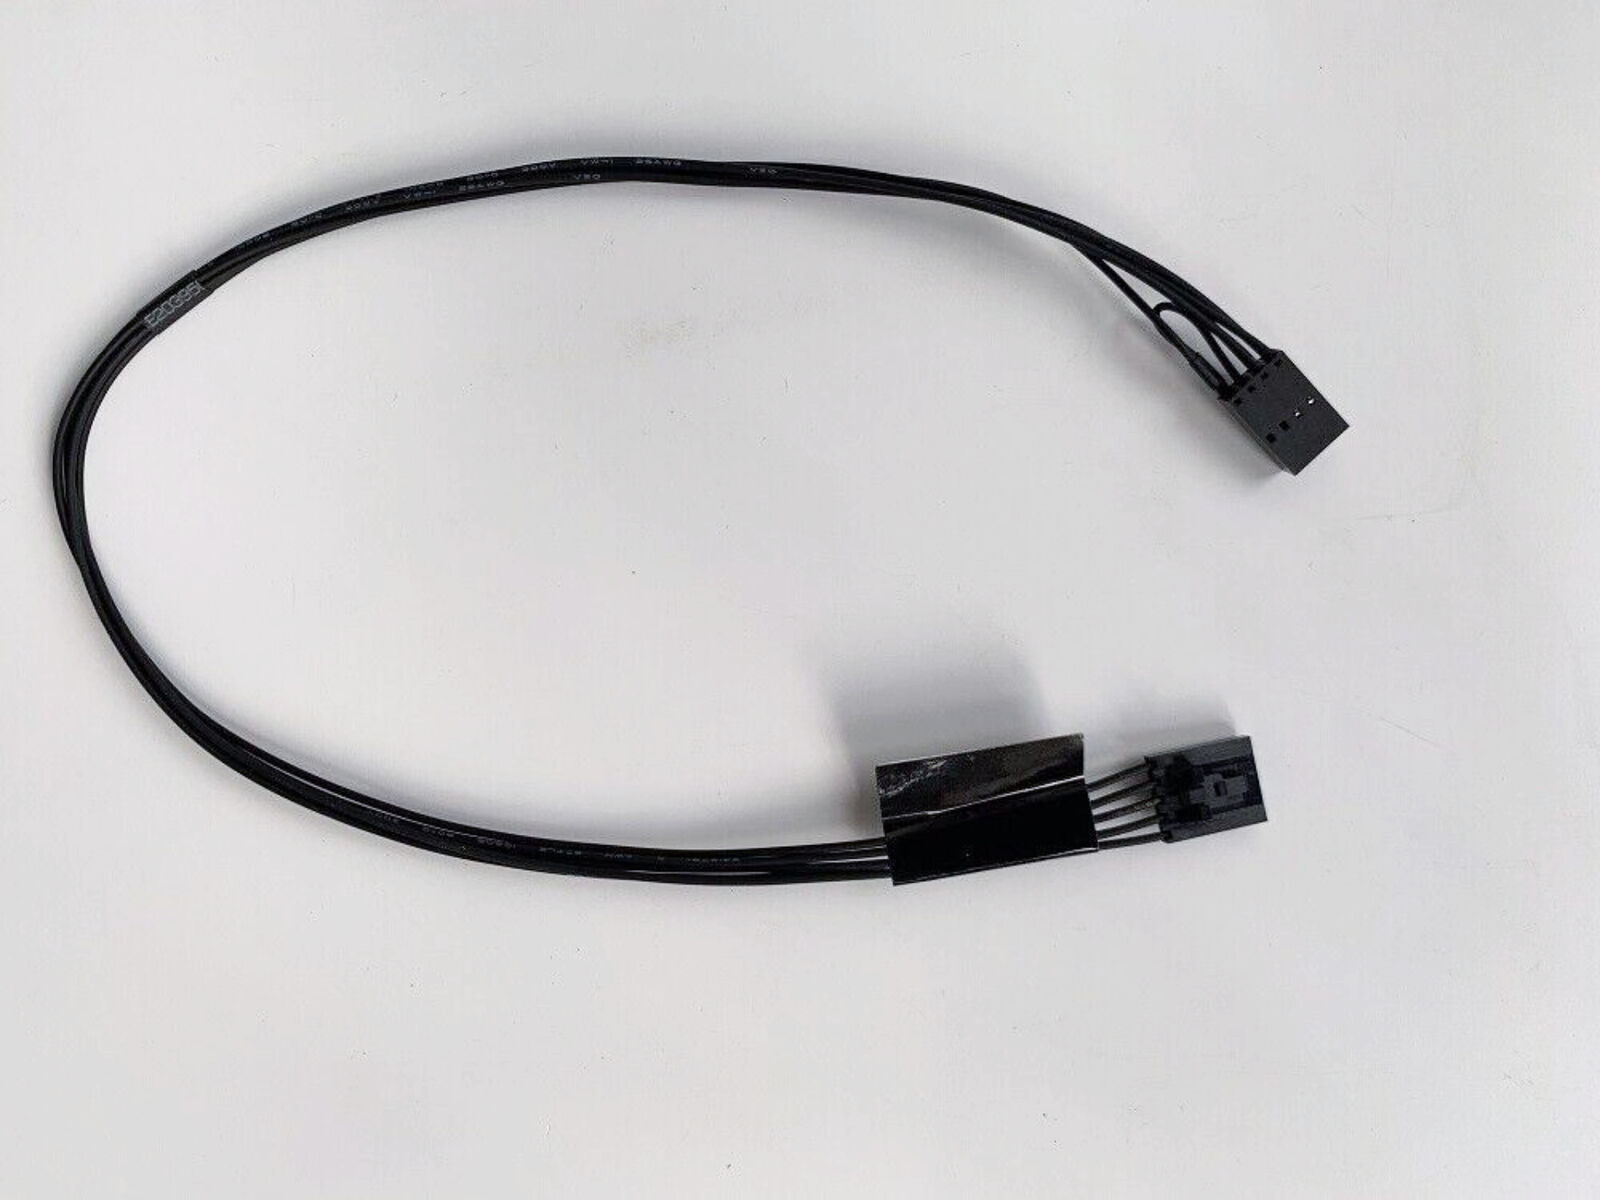 NEW Genuine HP 751366-001 Cable 40 cm For HP Thunderbolt-2 Pci-e 753732-001